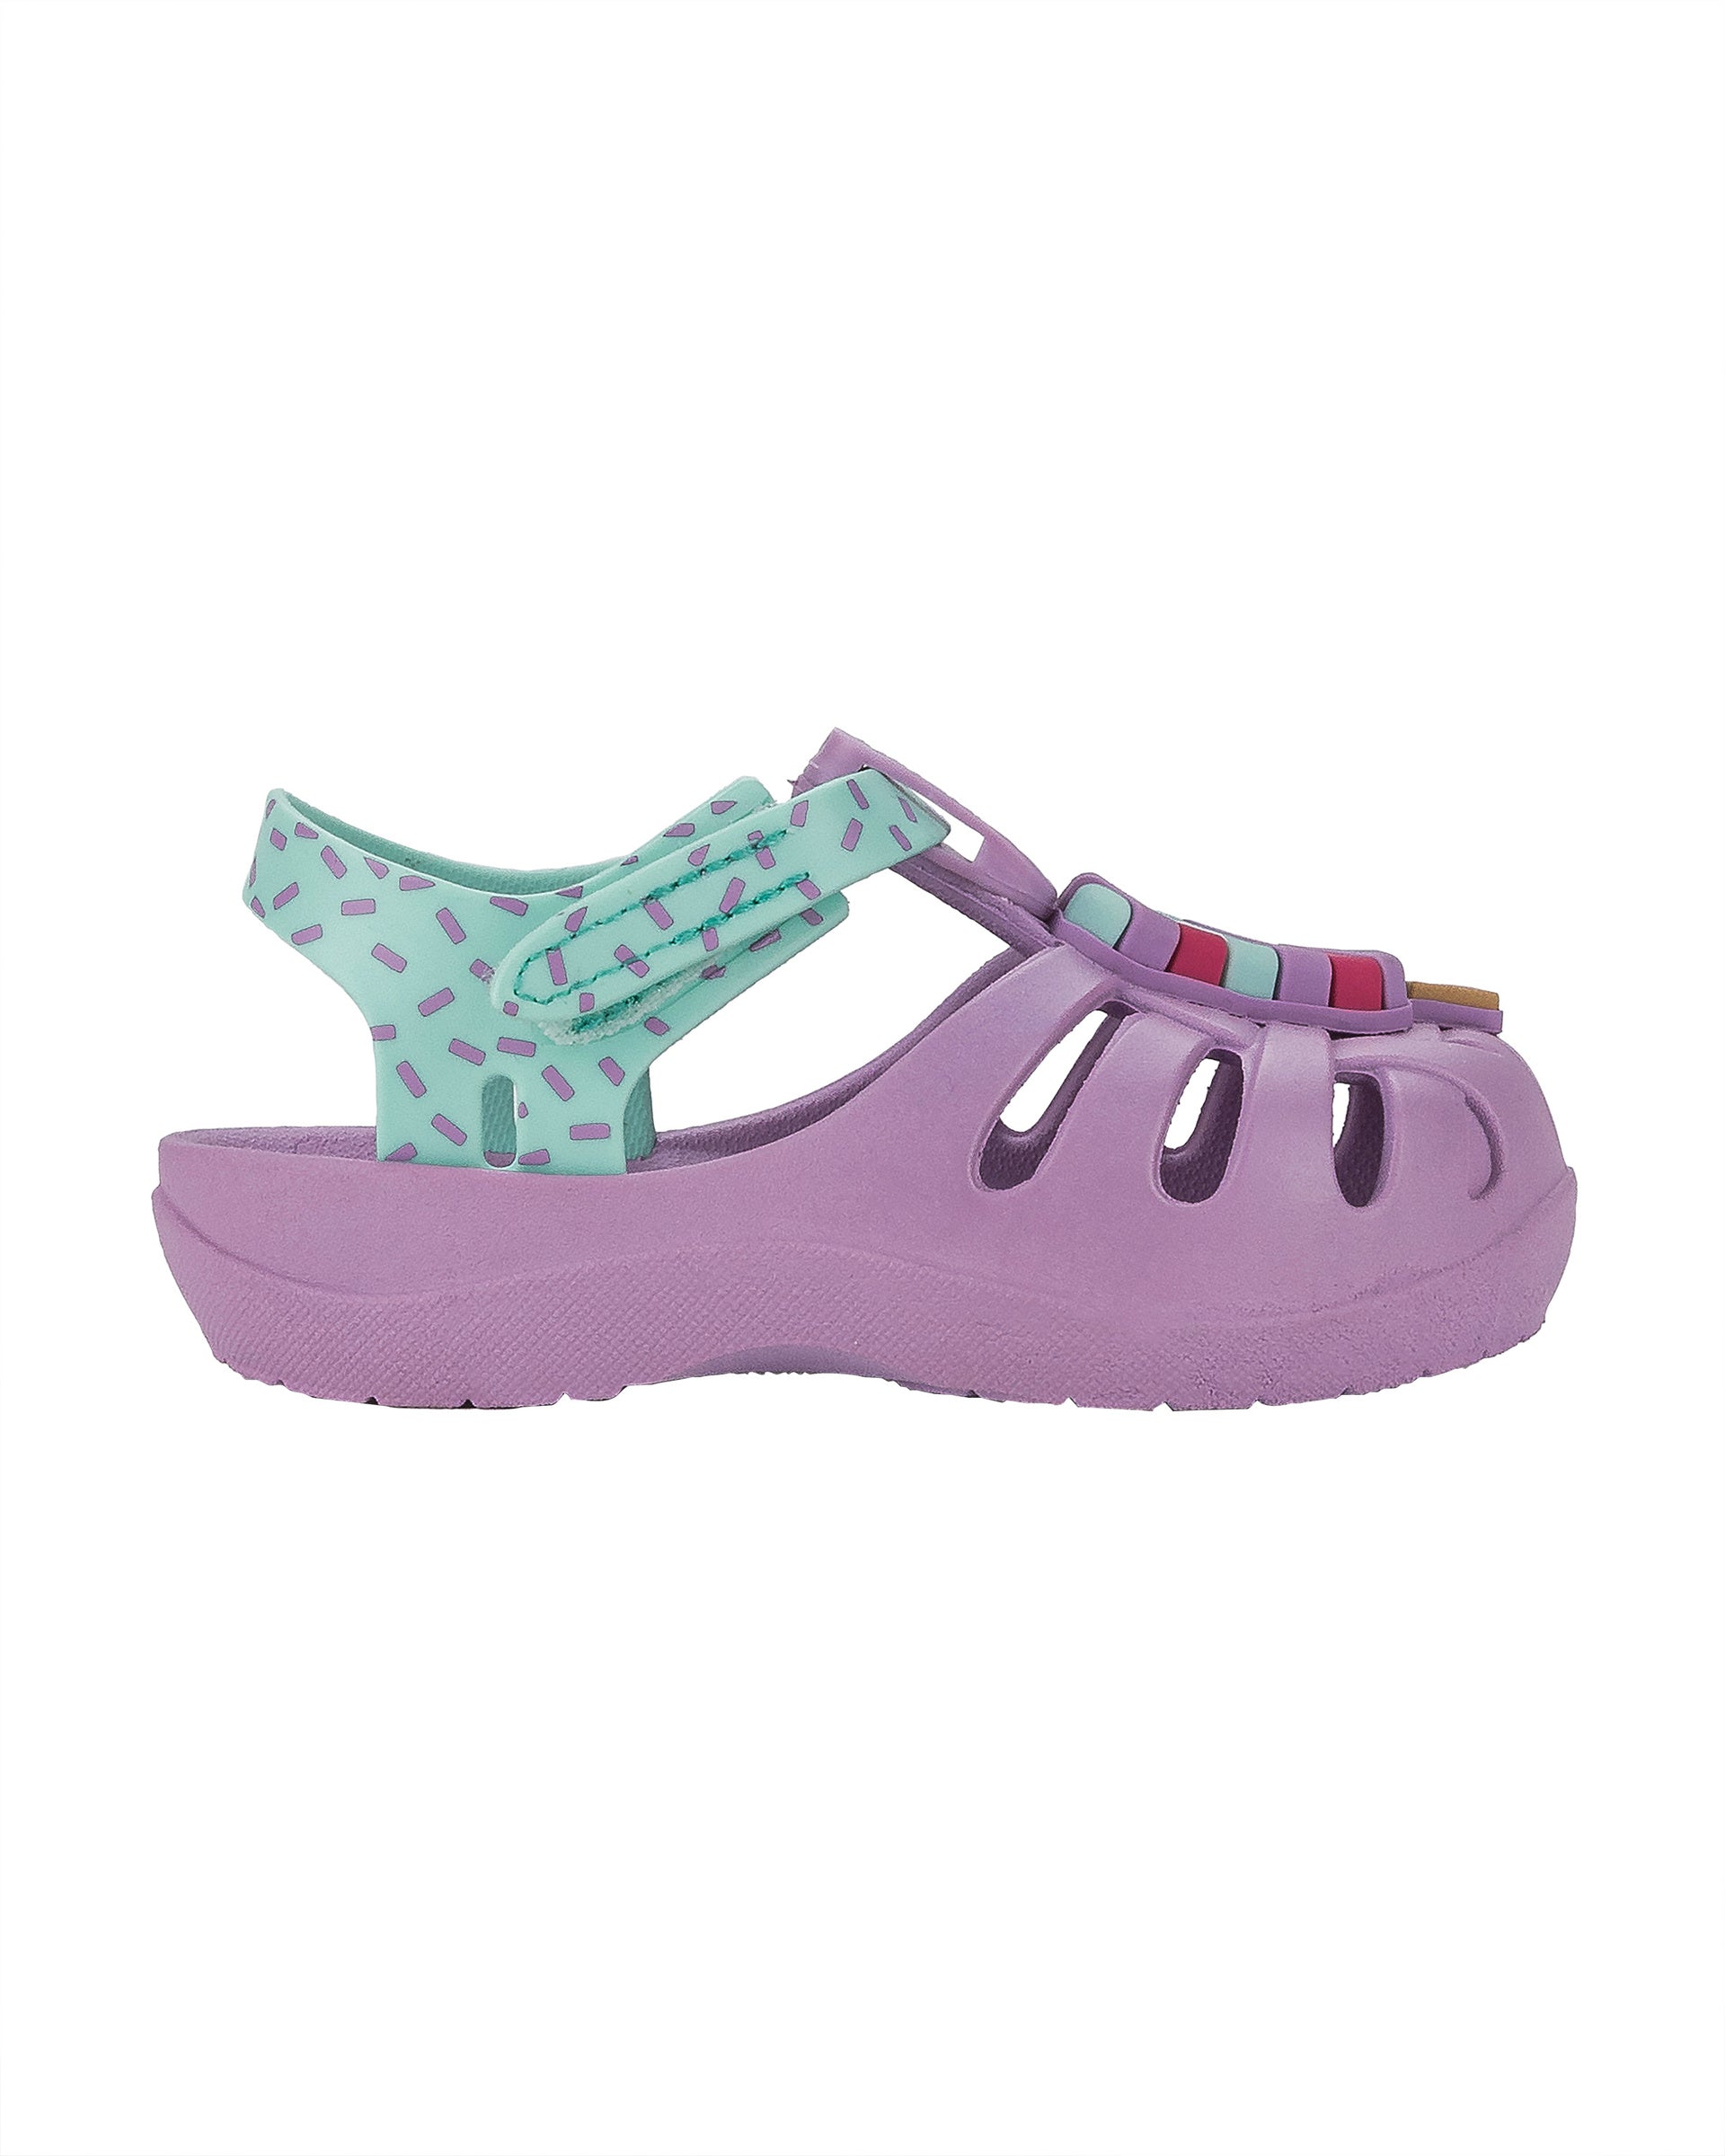 Outer side view of a purple and green Ipanema Summer baby fisherman sandal with popsicle on the upper.